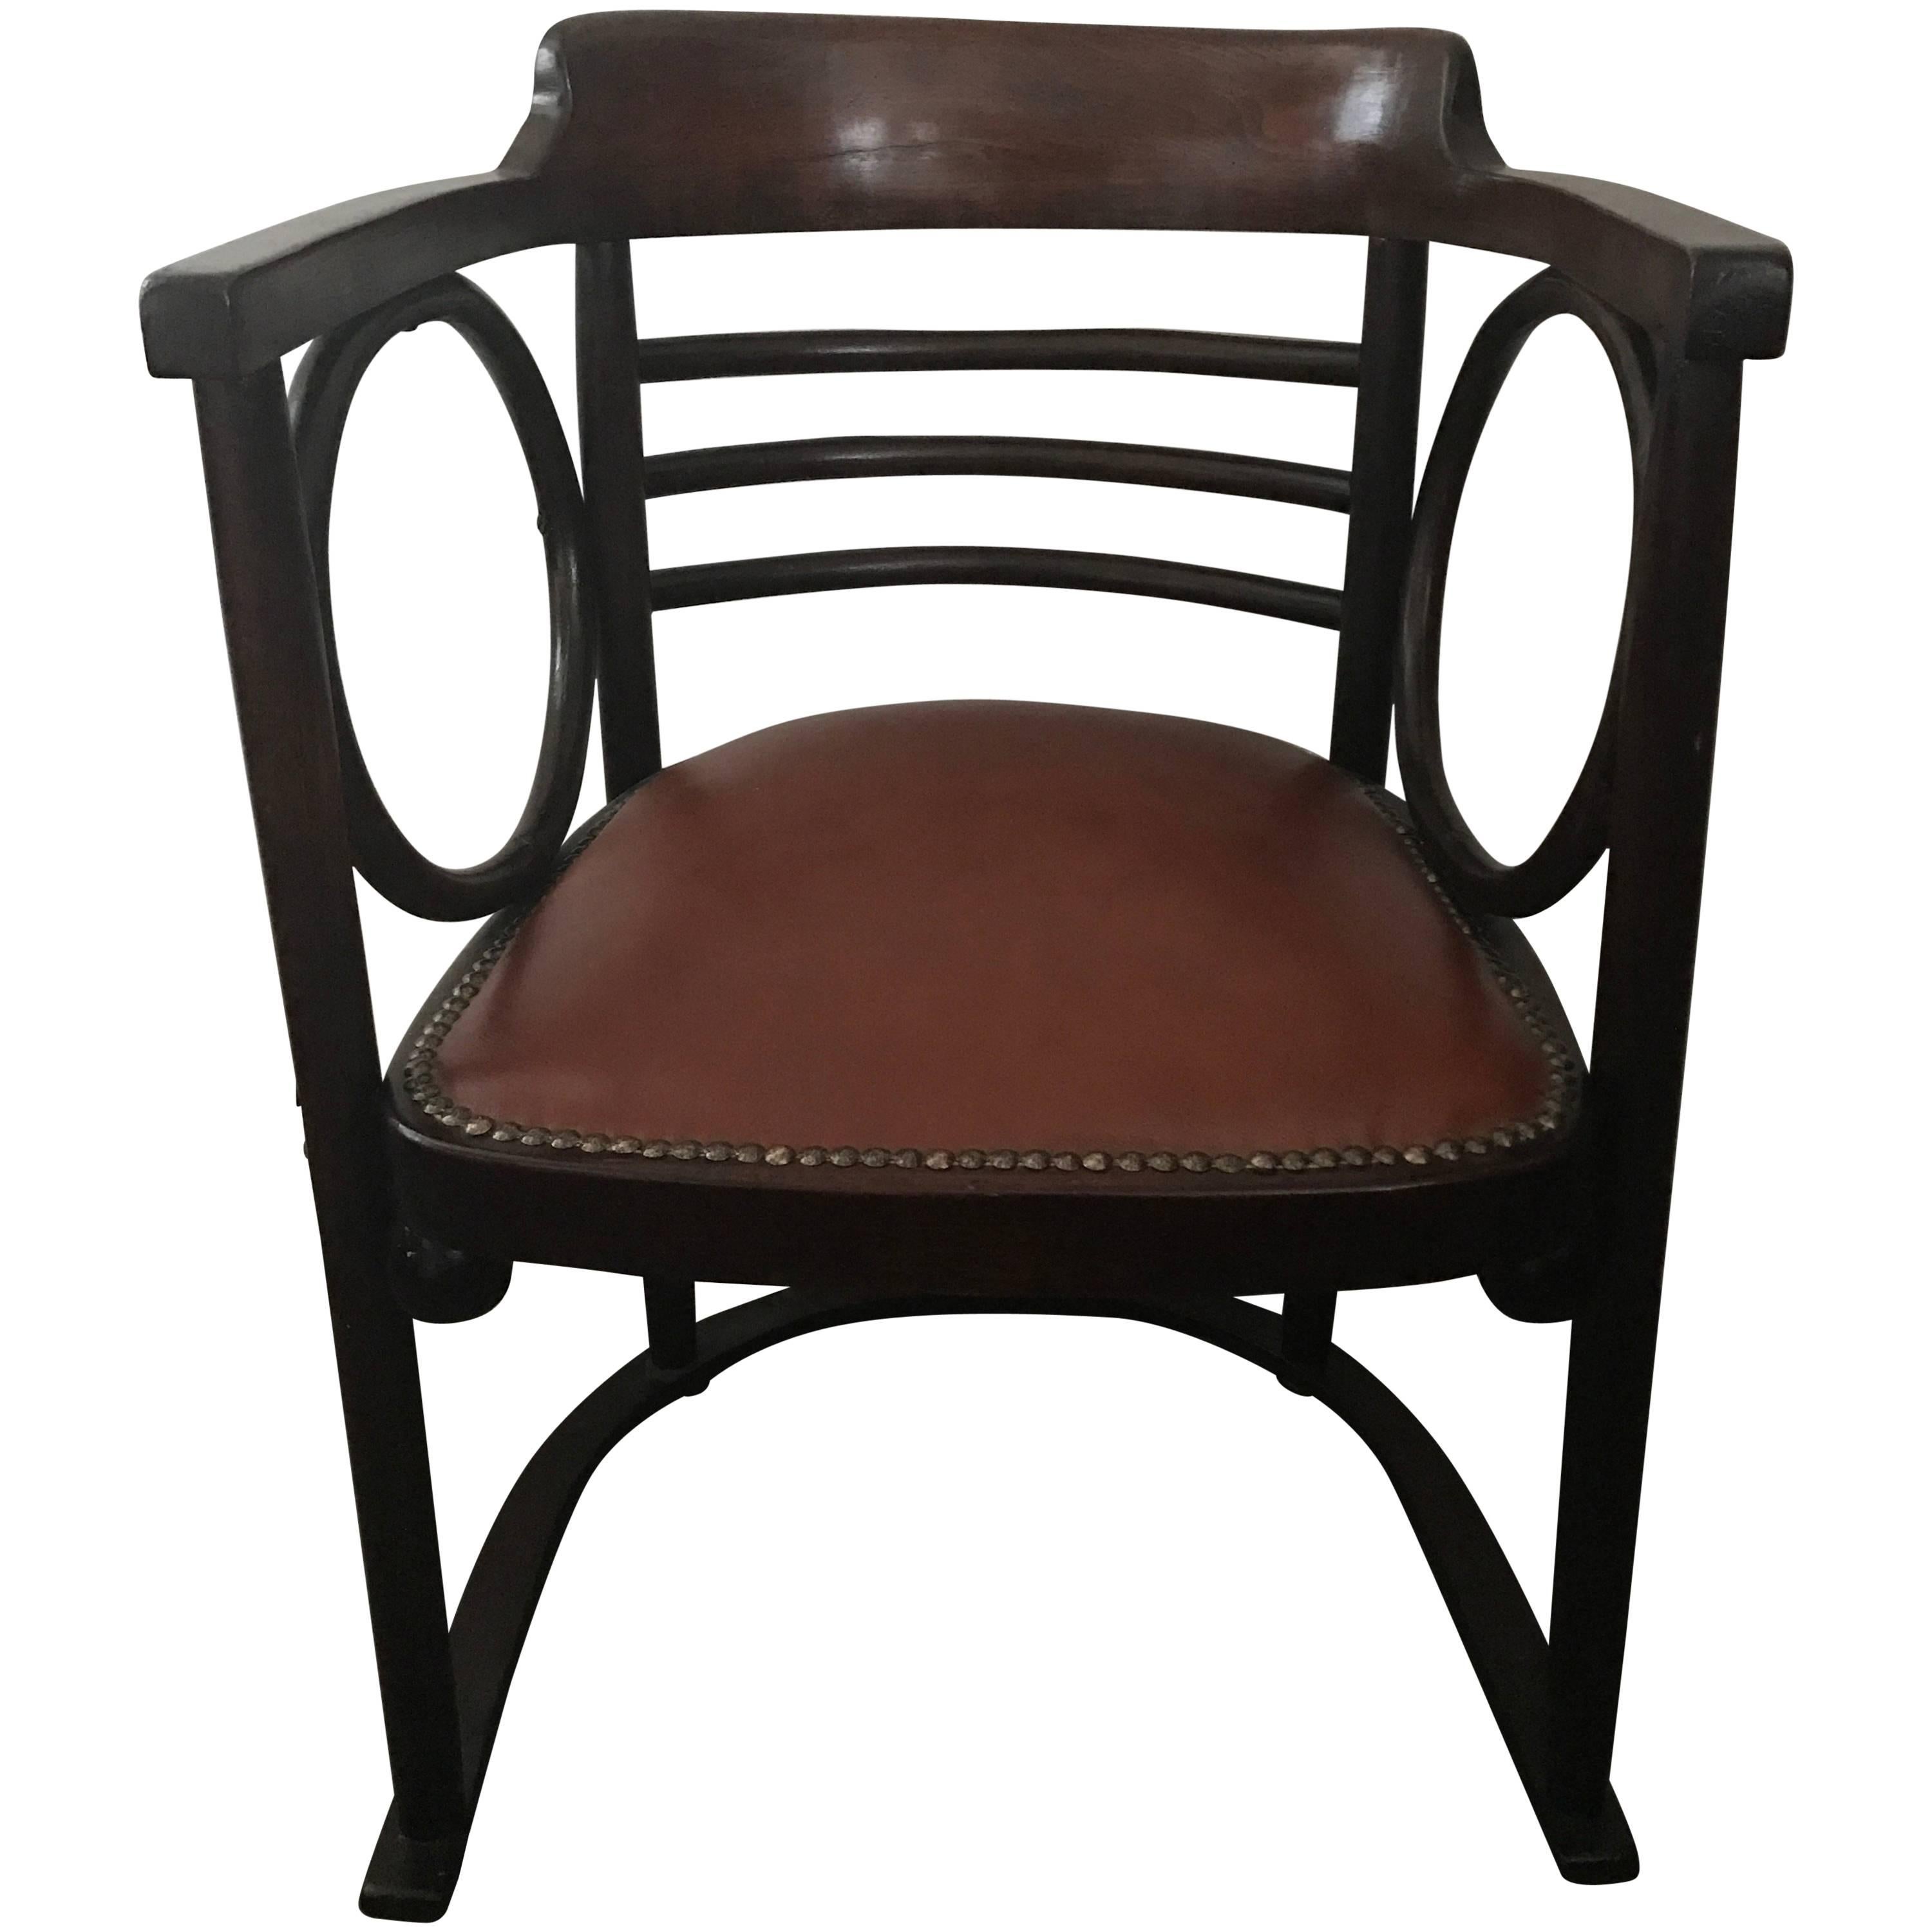 Early 20th Century Vienna Concession Fledermaus Armchair by Josef Hoffmann For Sale